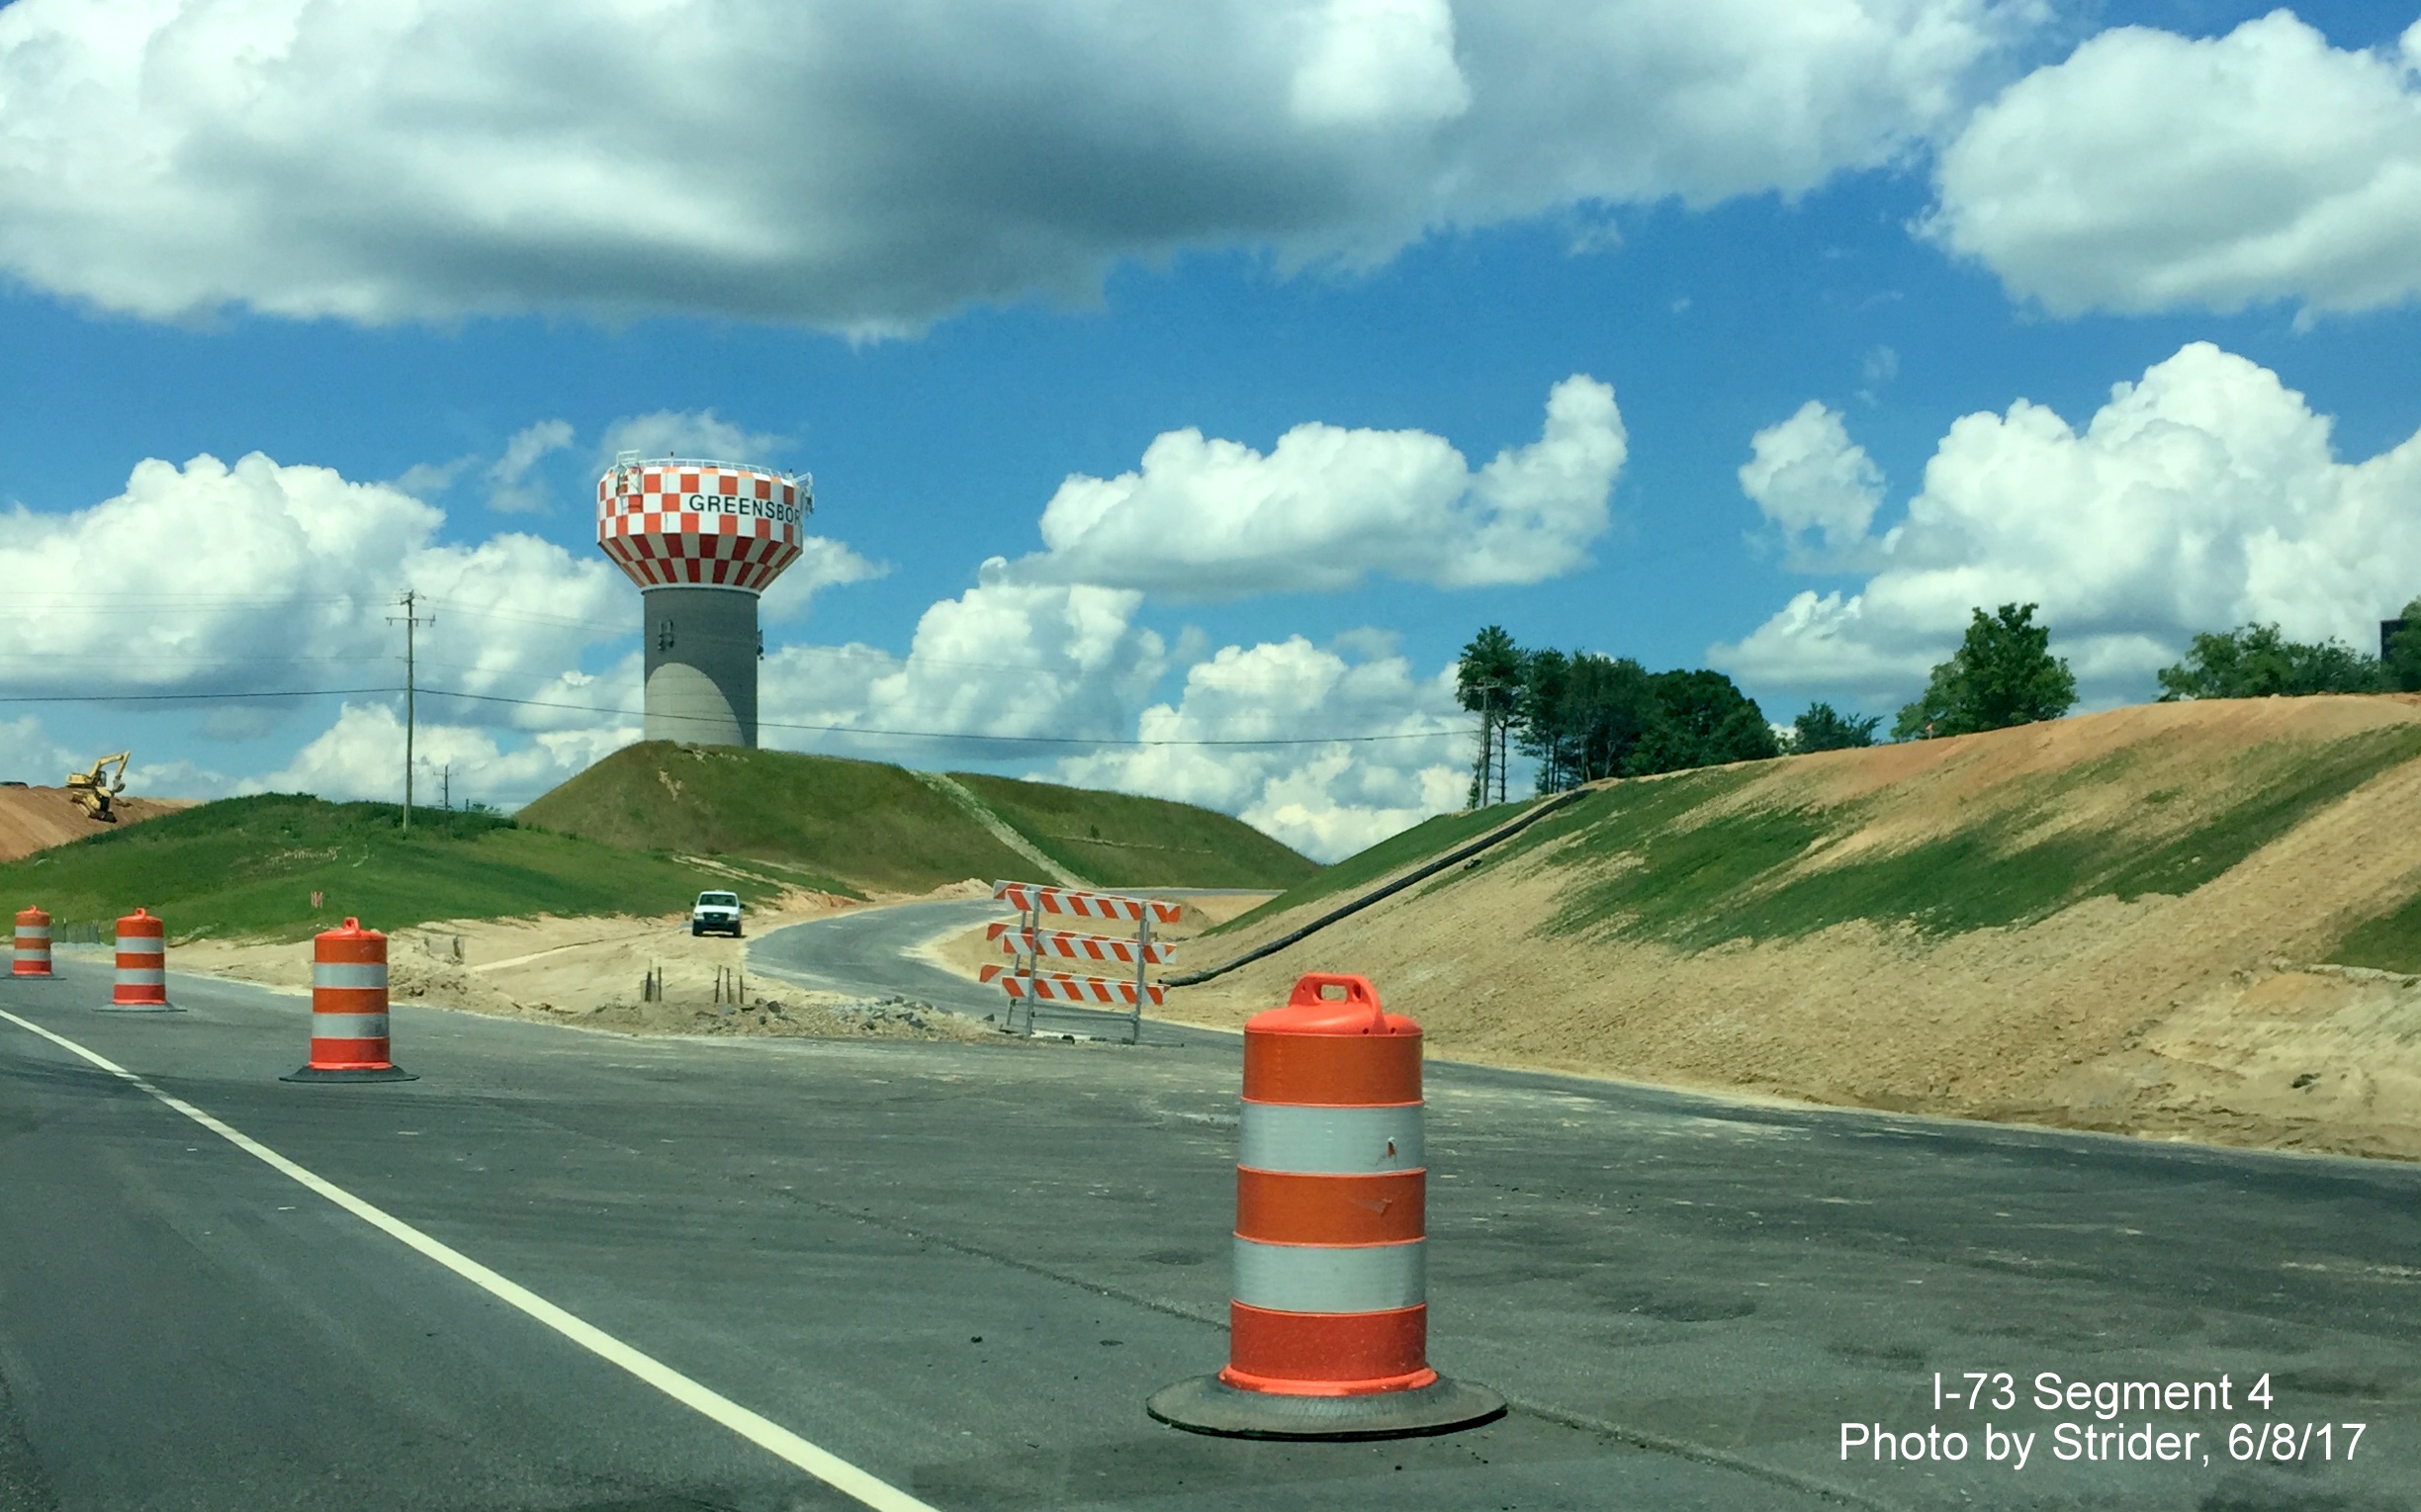 Image taken of ramp construction ant Future I-73 South and NC 68 North interchange in Greensboro, from Strider